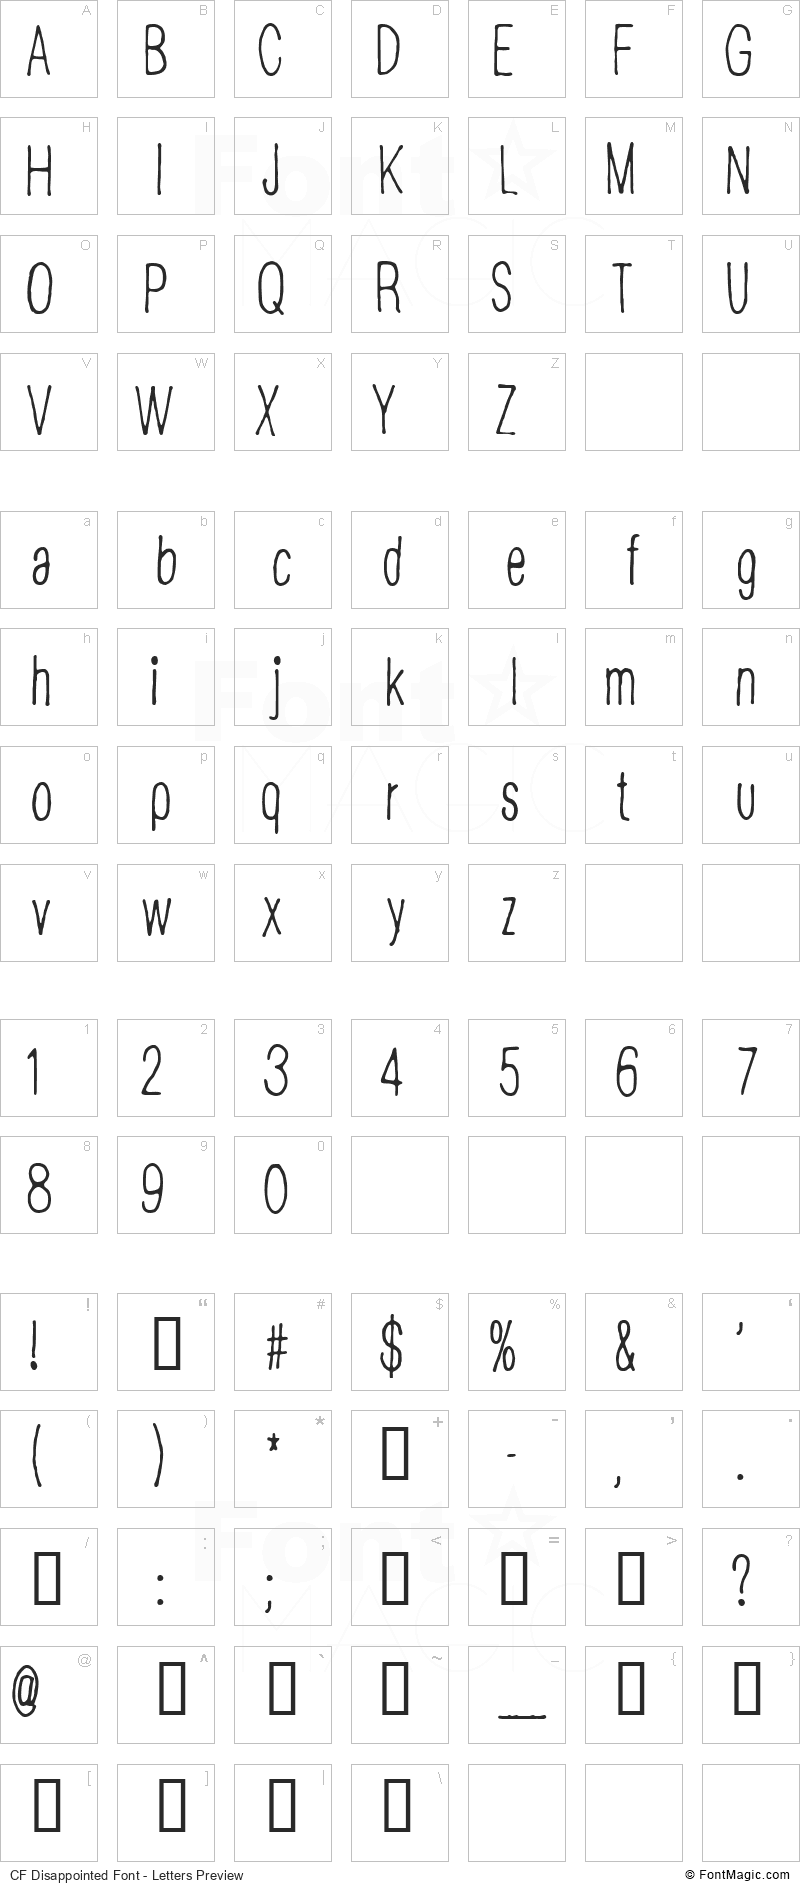 CF Disappointed Font - All Latters Preview Chart